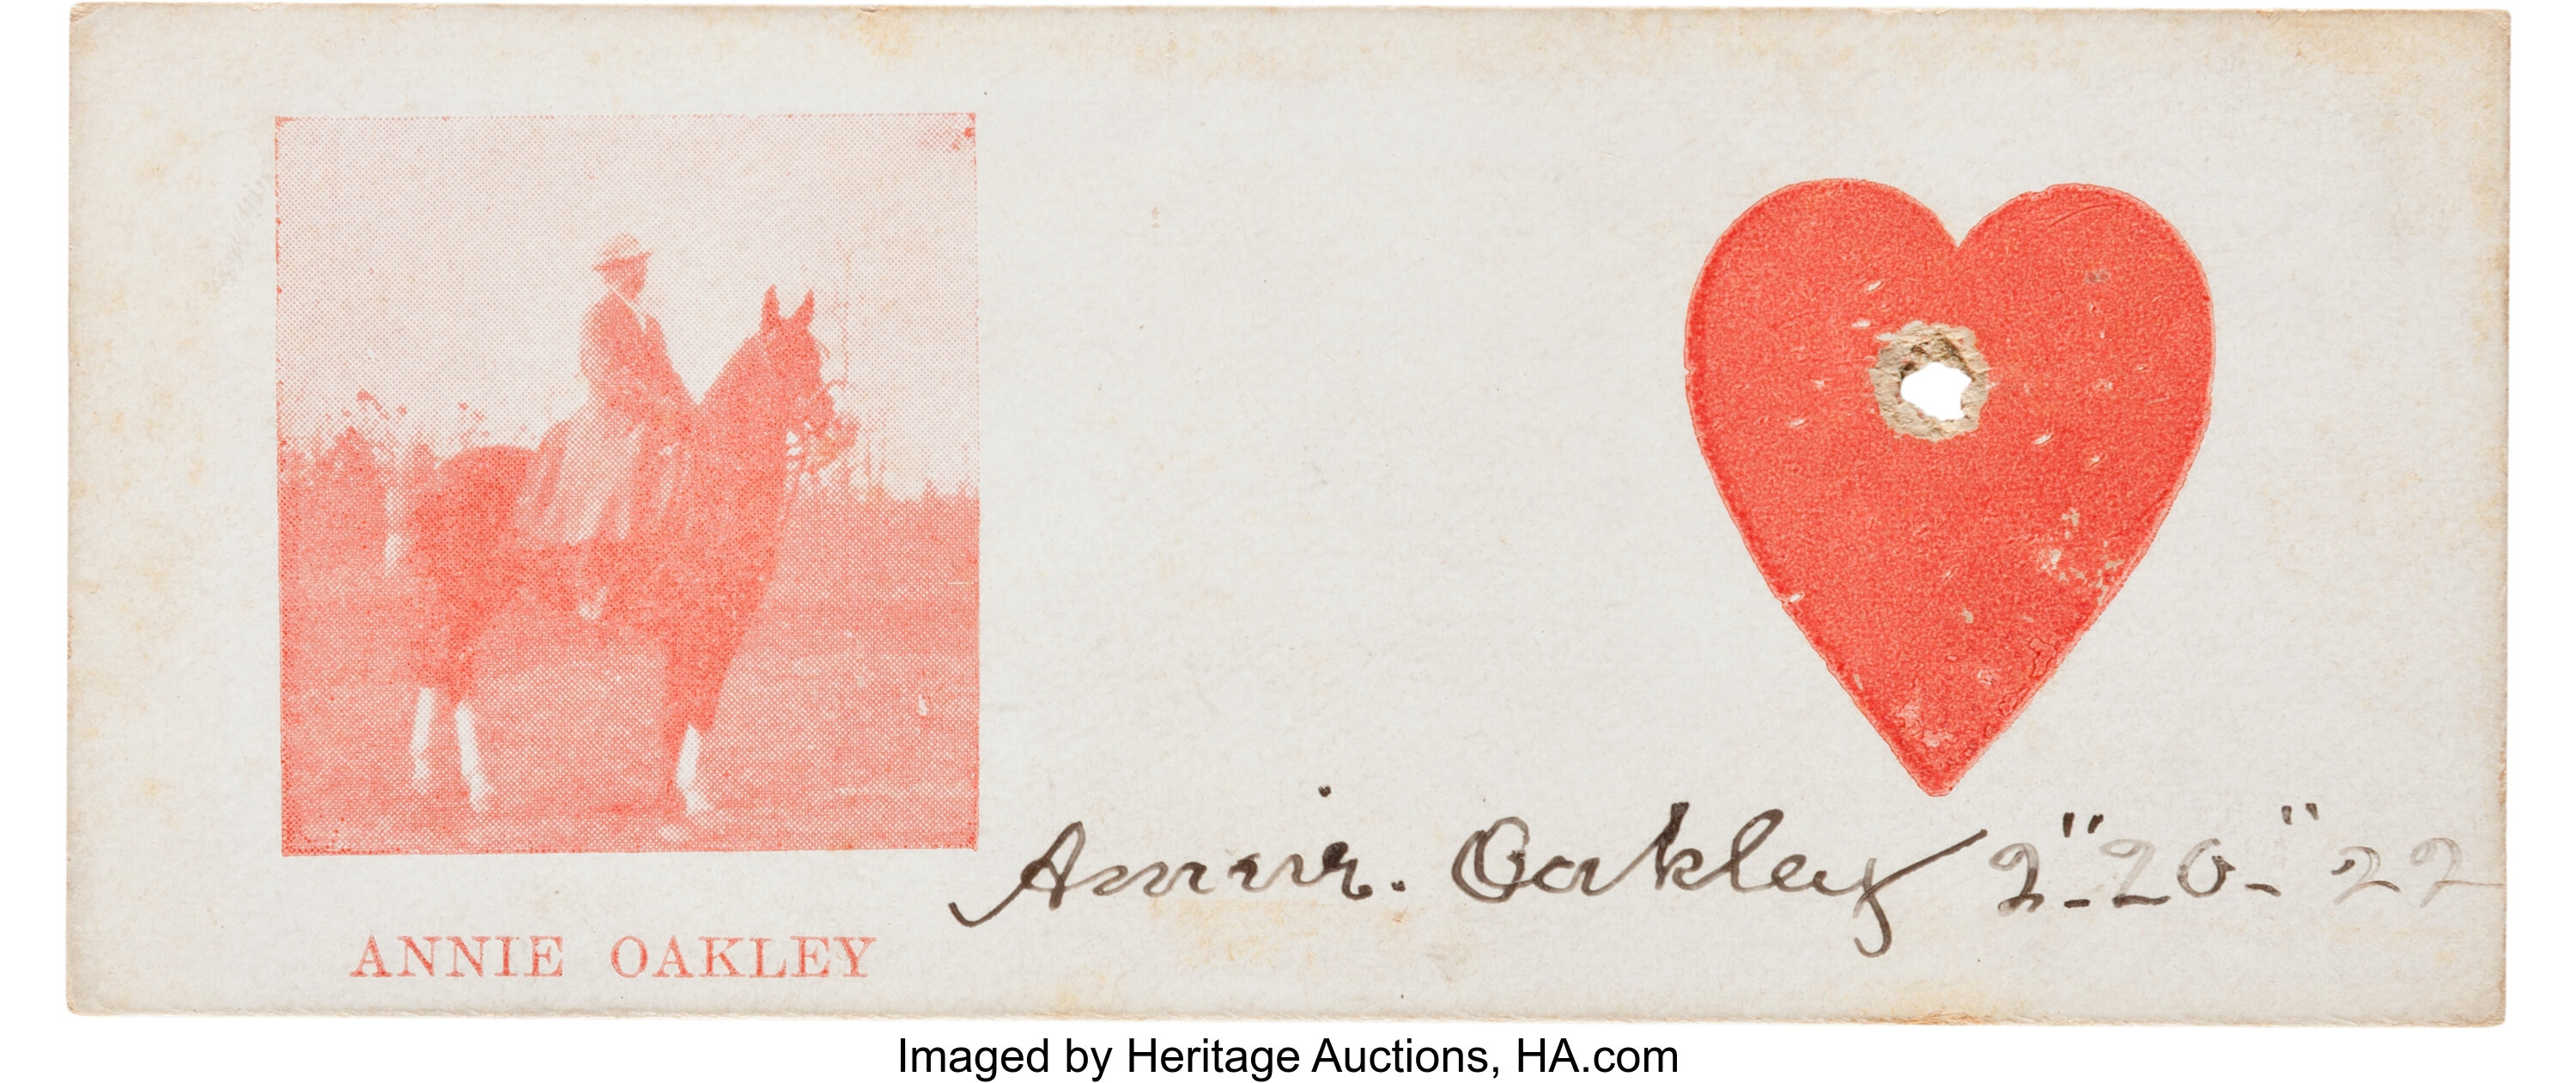 Annie Oakley: One of the Most Sought-After Forms of Her | Lot #51001 |  Heritage Auctions